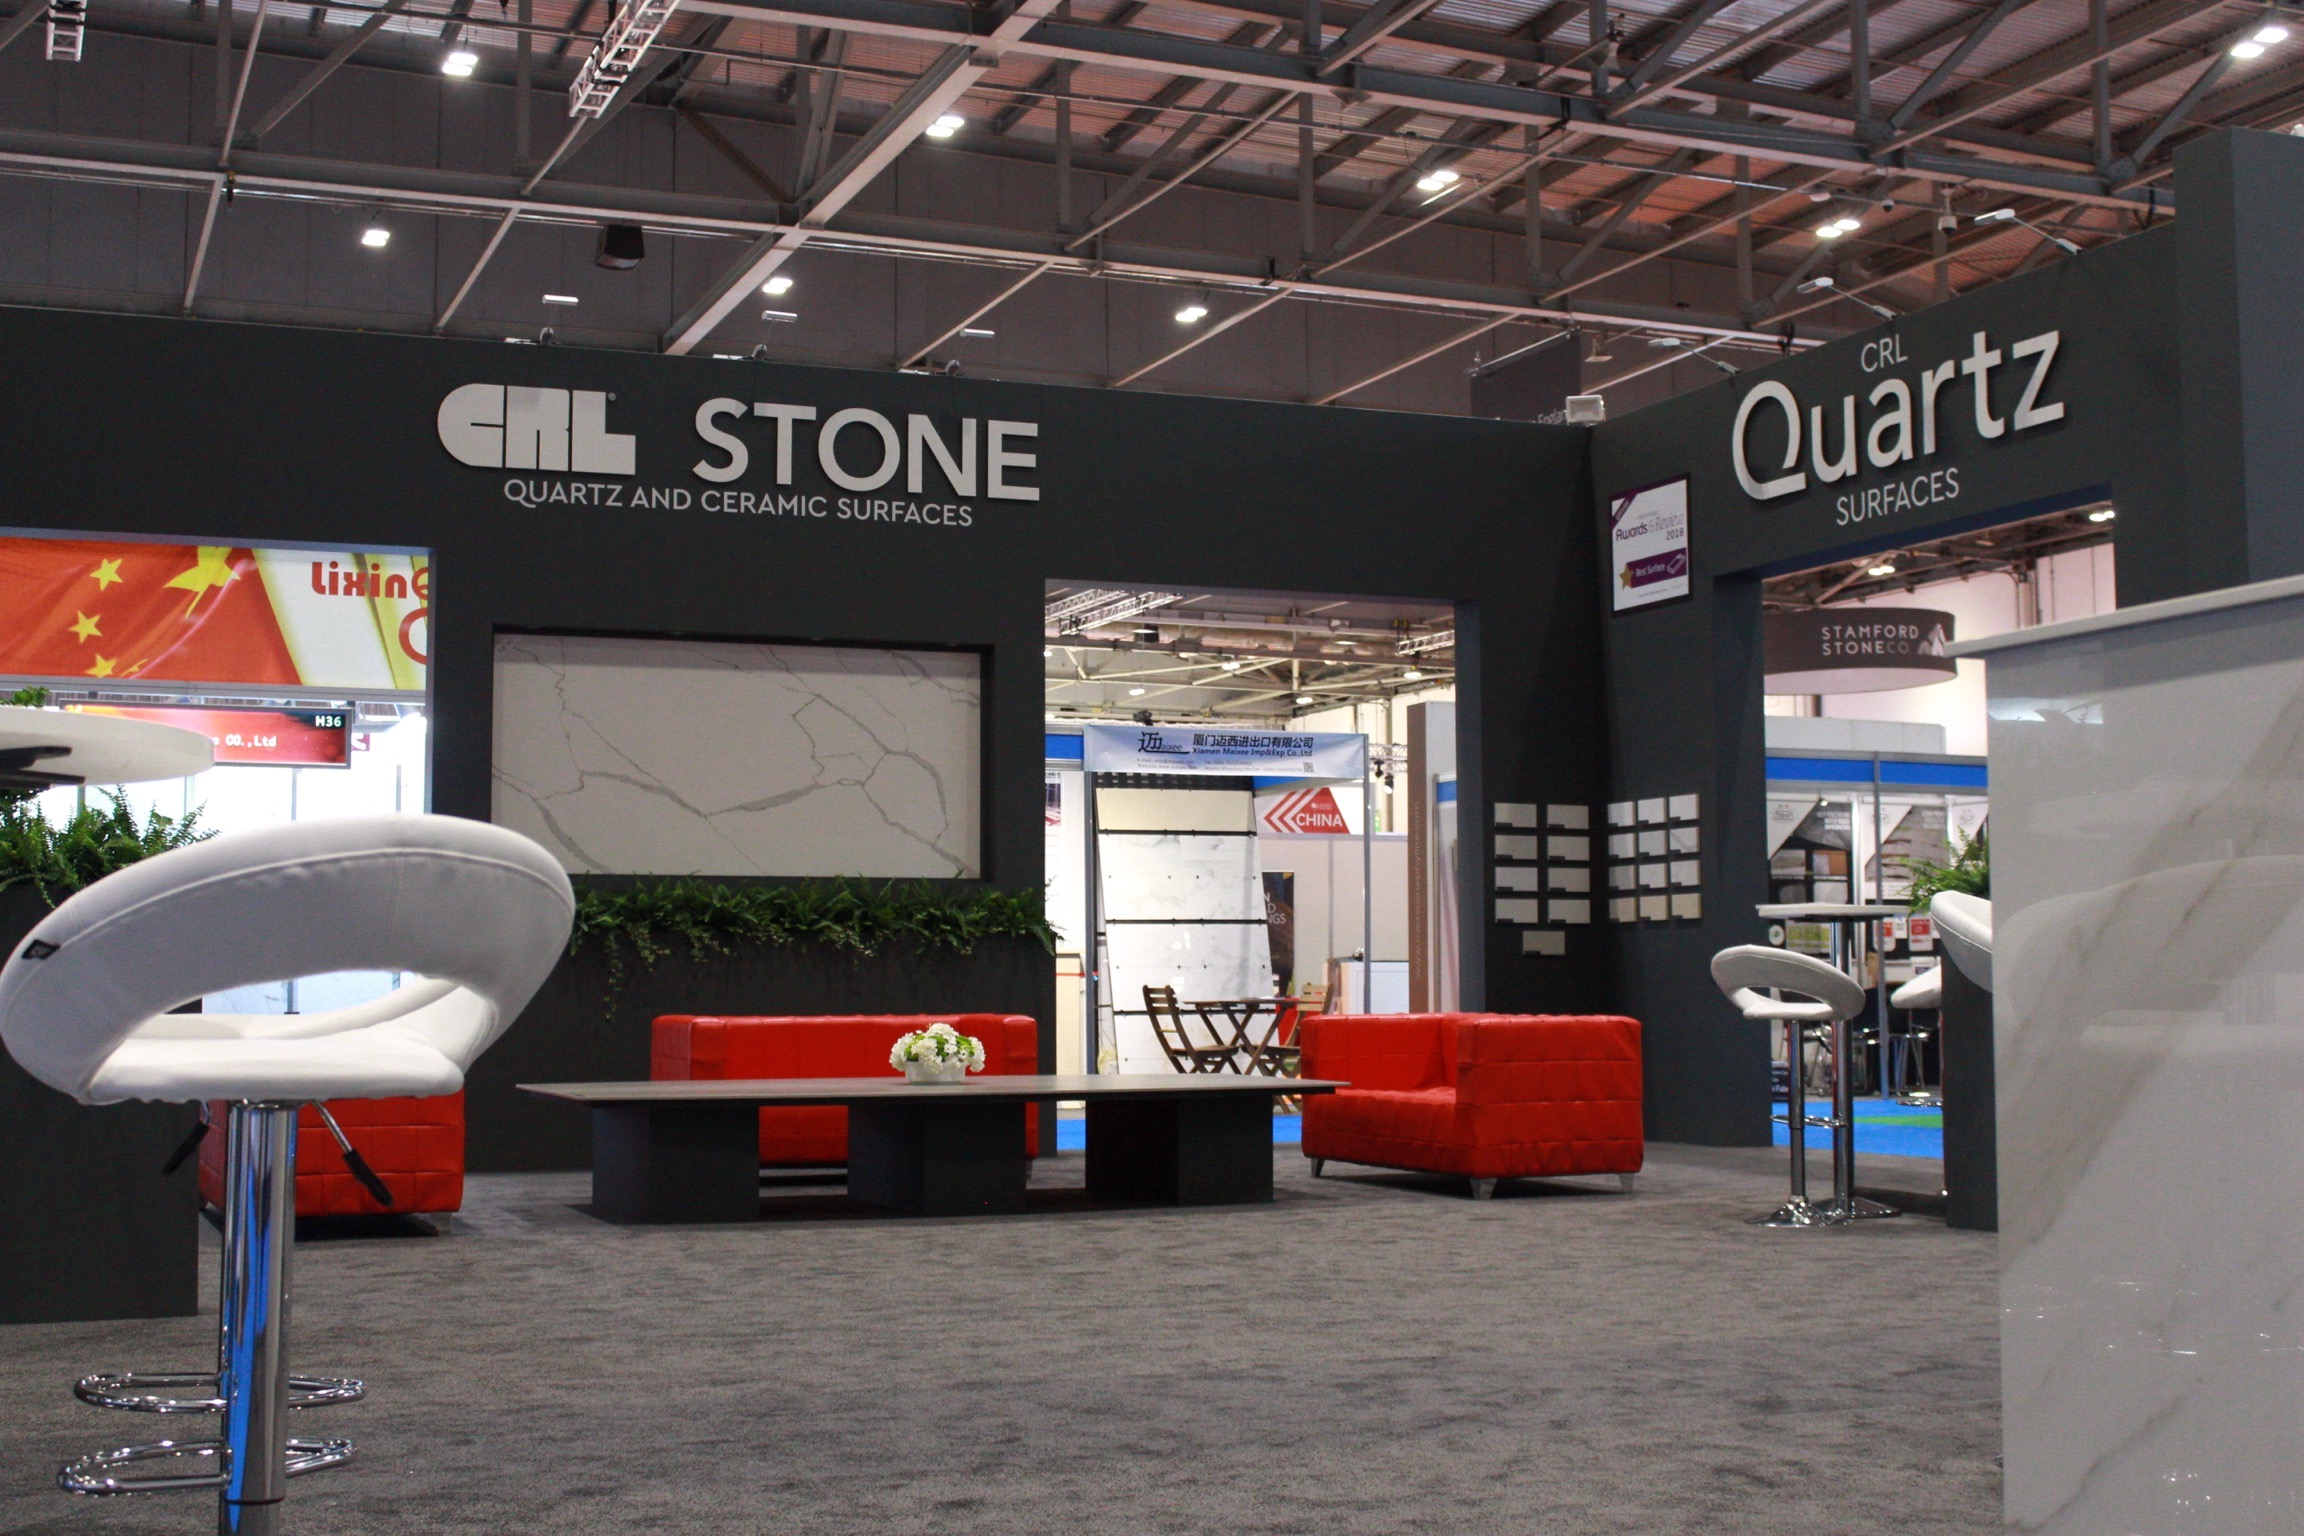 CRL Stone’s second outing to The Natural Stone Show